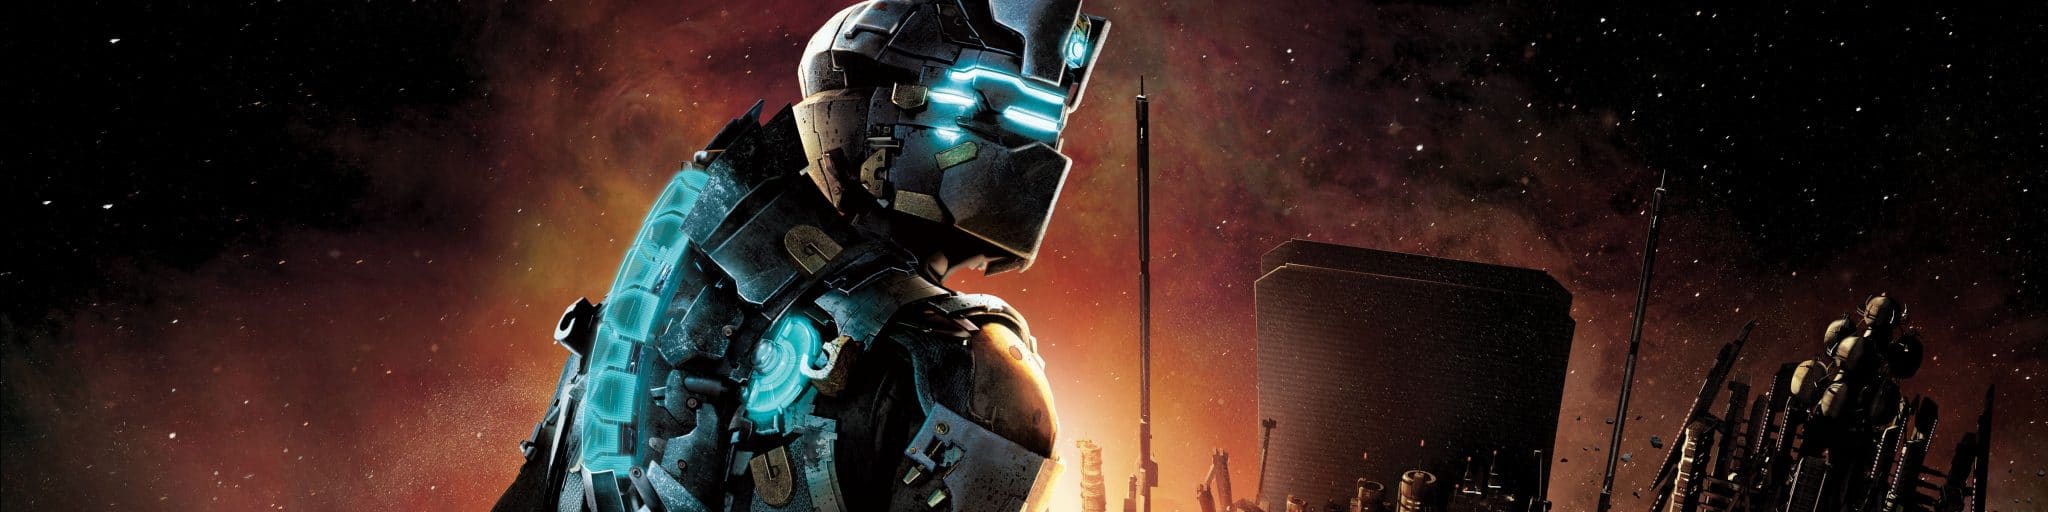 Dead Space 2 Banner featuring Isaac Clark.